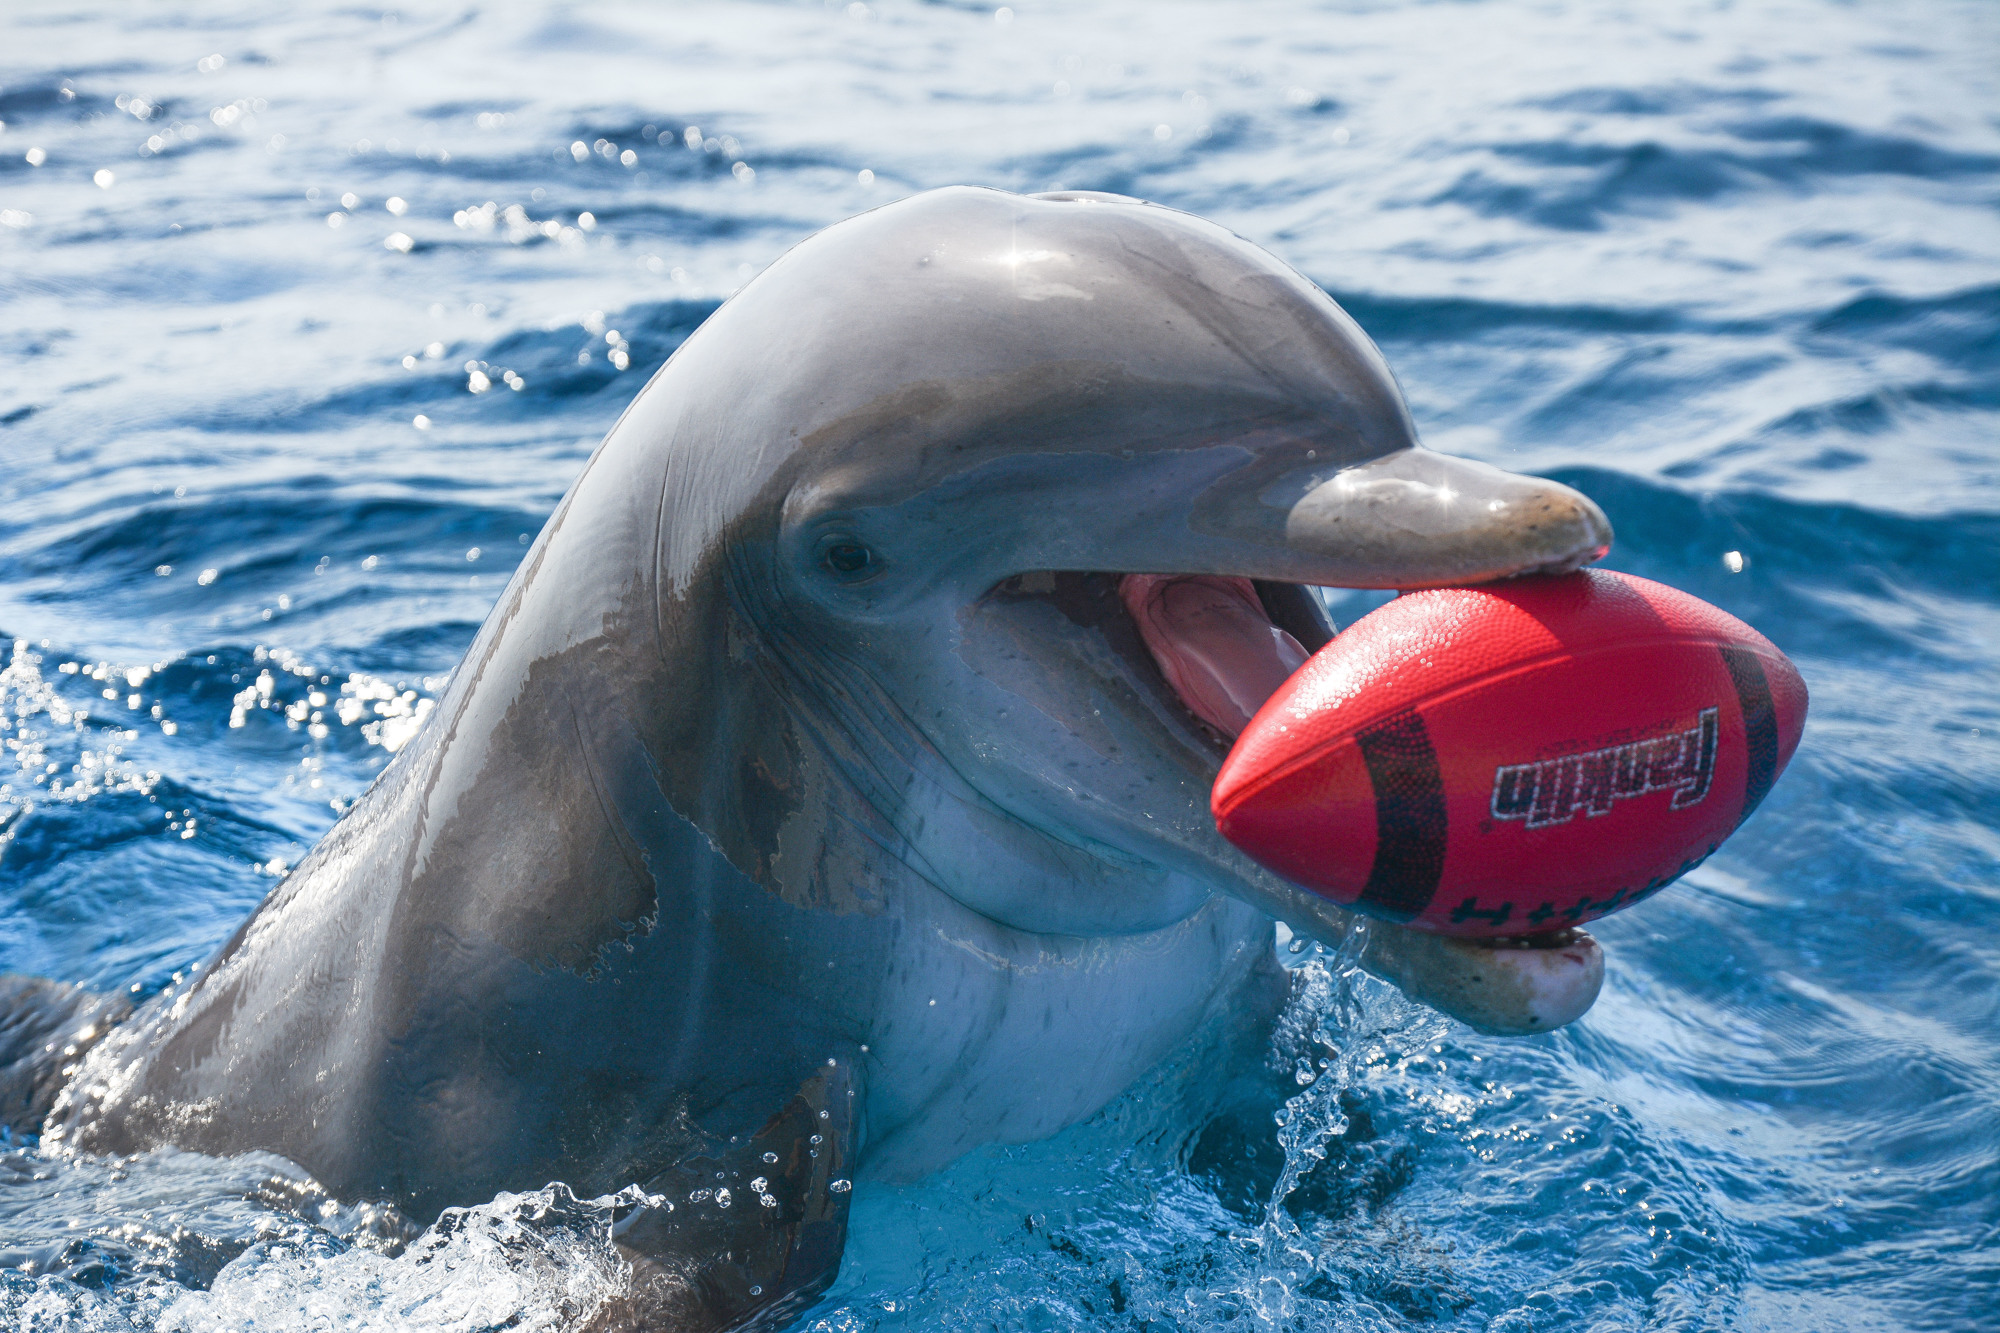 Sunny plays with a football, which is one of the objects Marineland refers to as a 